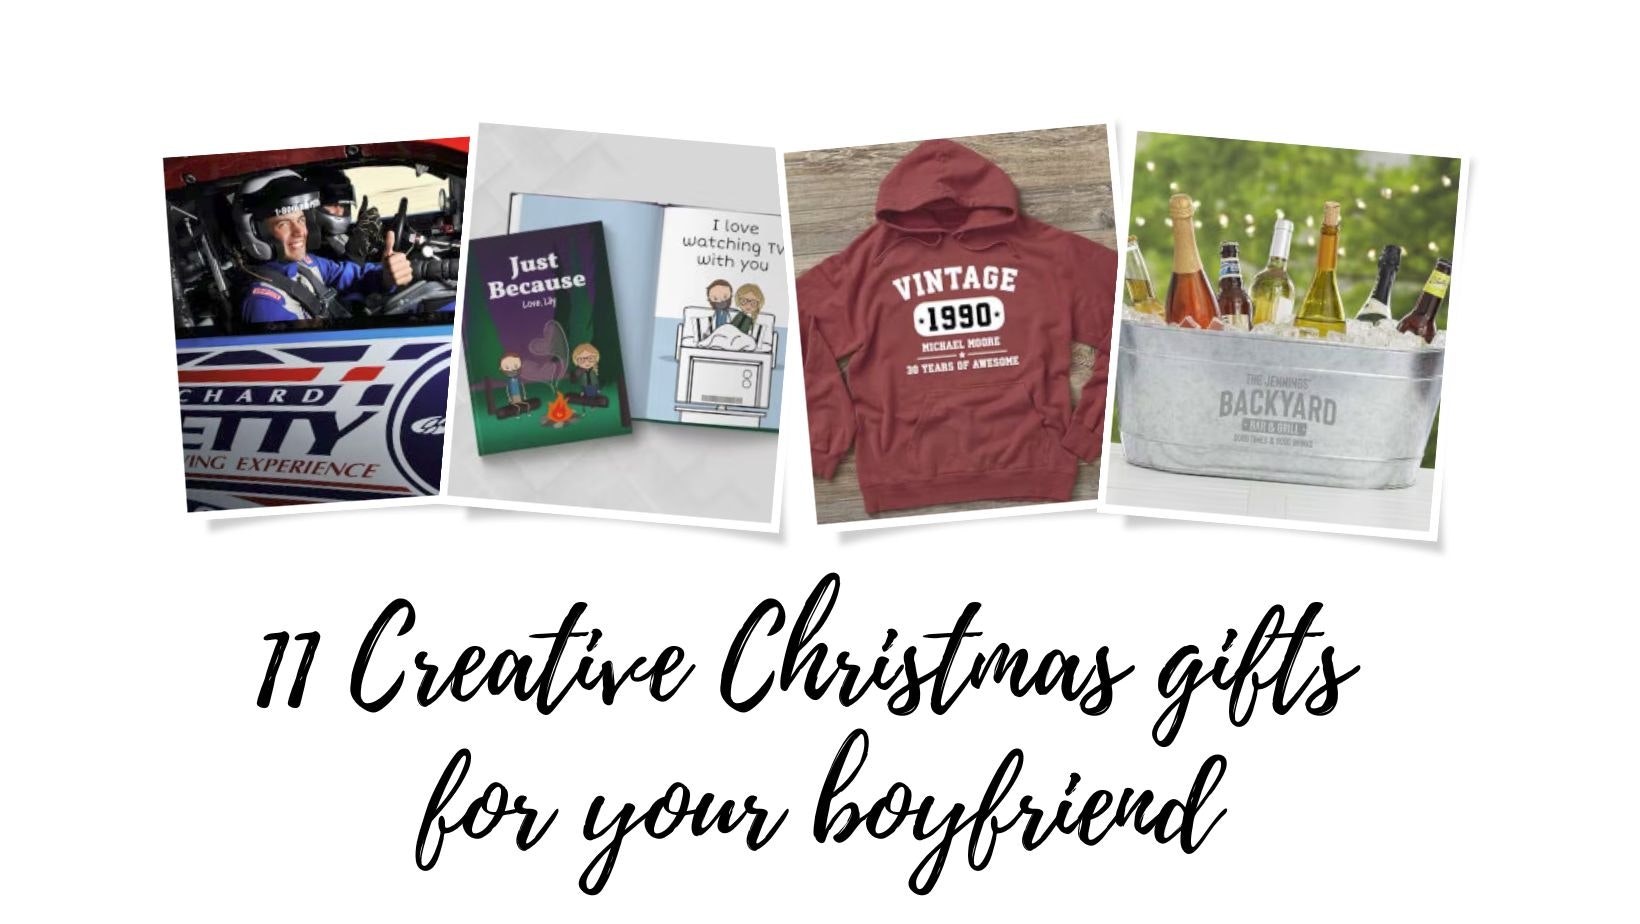 Personalized Gift Guide for Him/Boyfriend